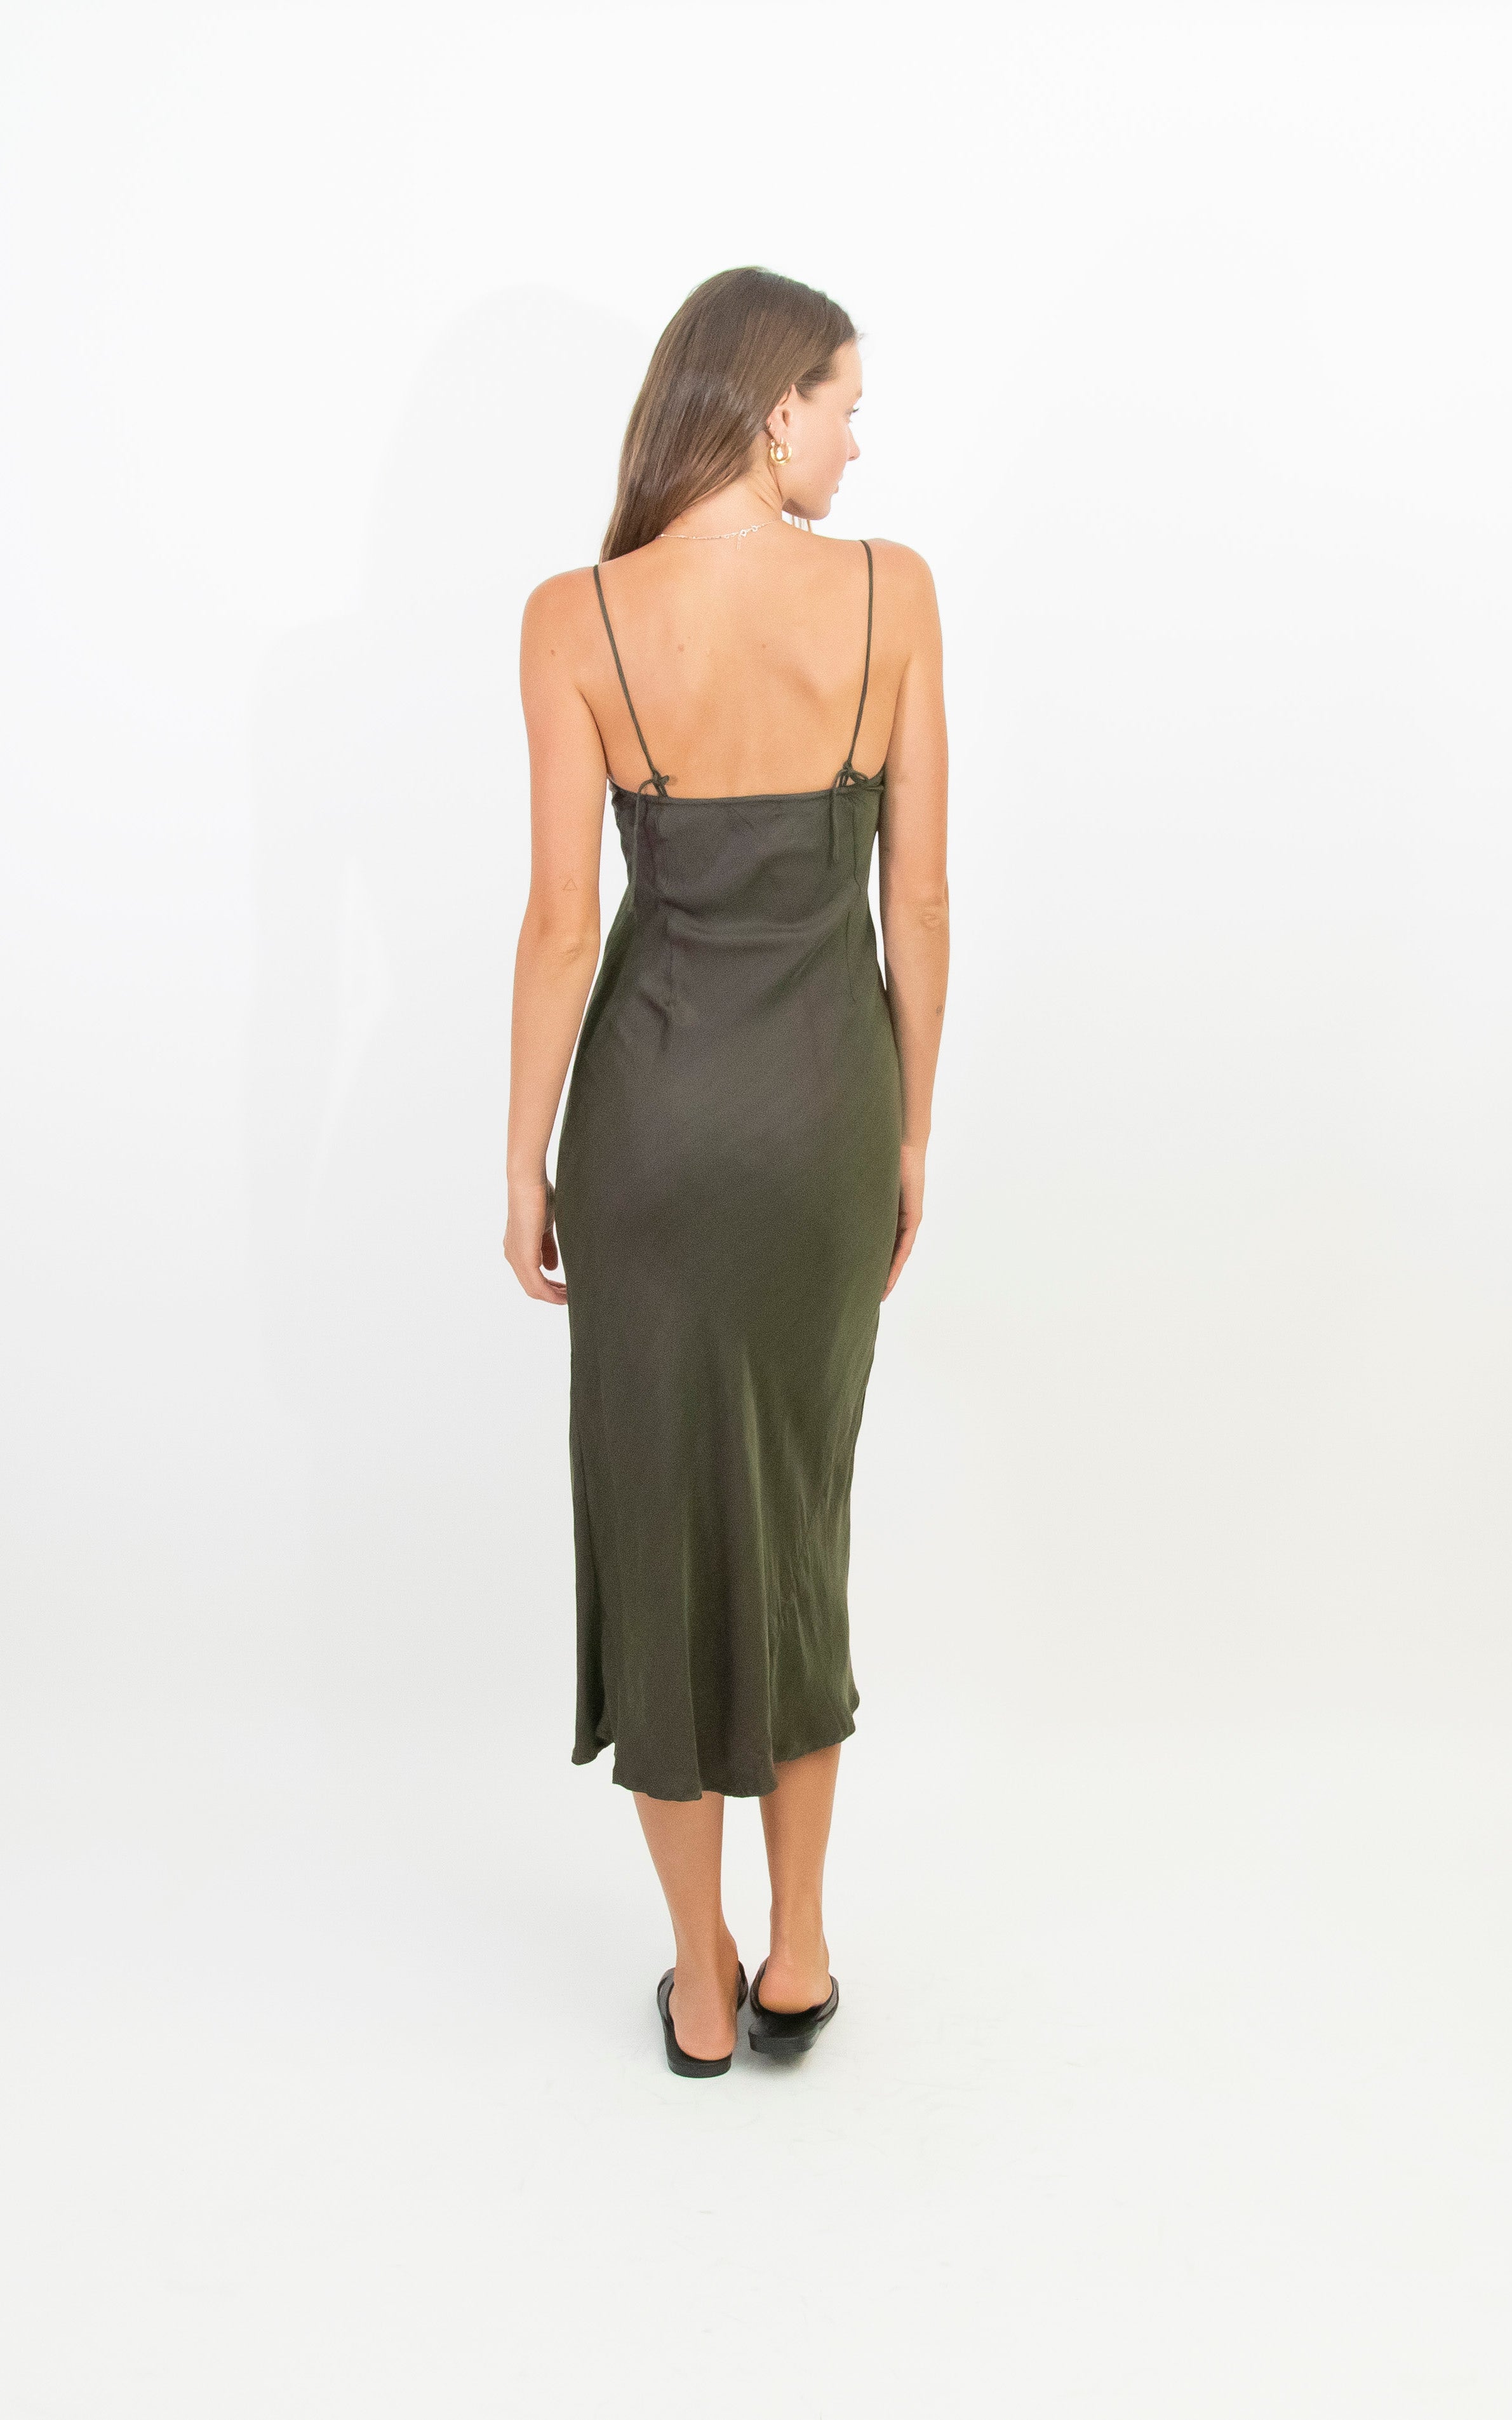 Bias cut full length dress with adjustable straps